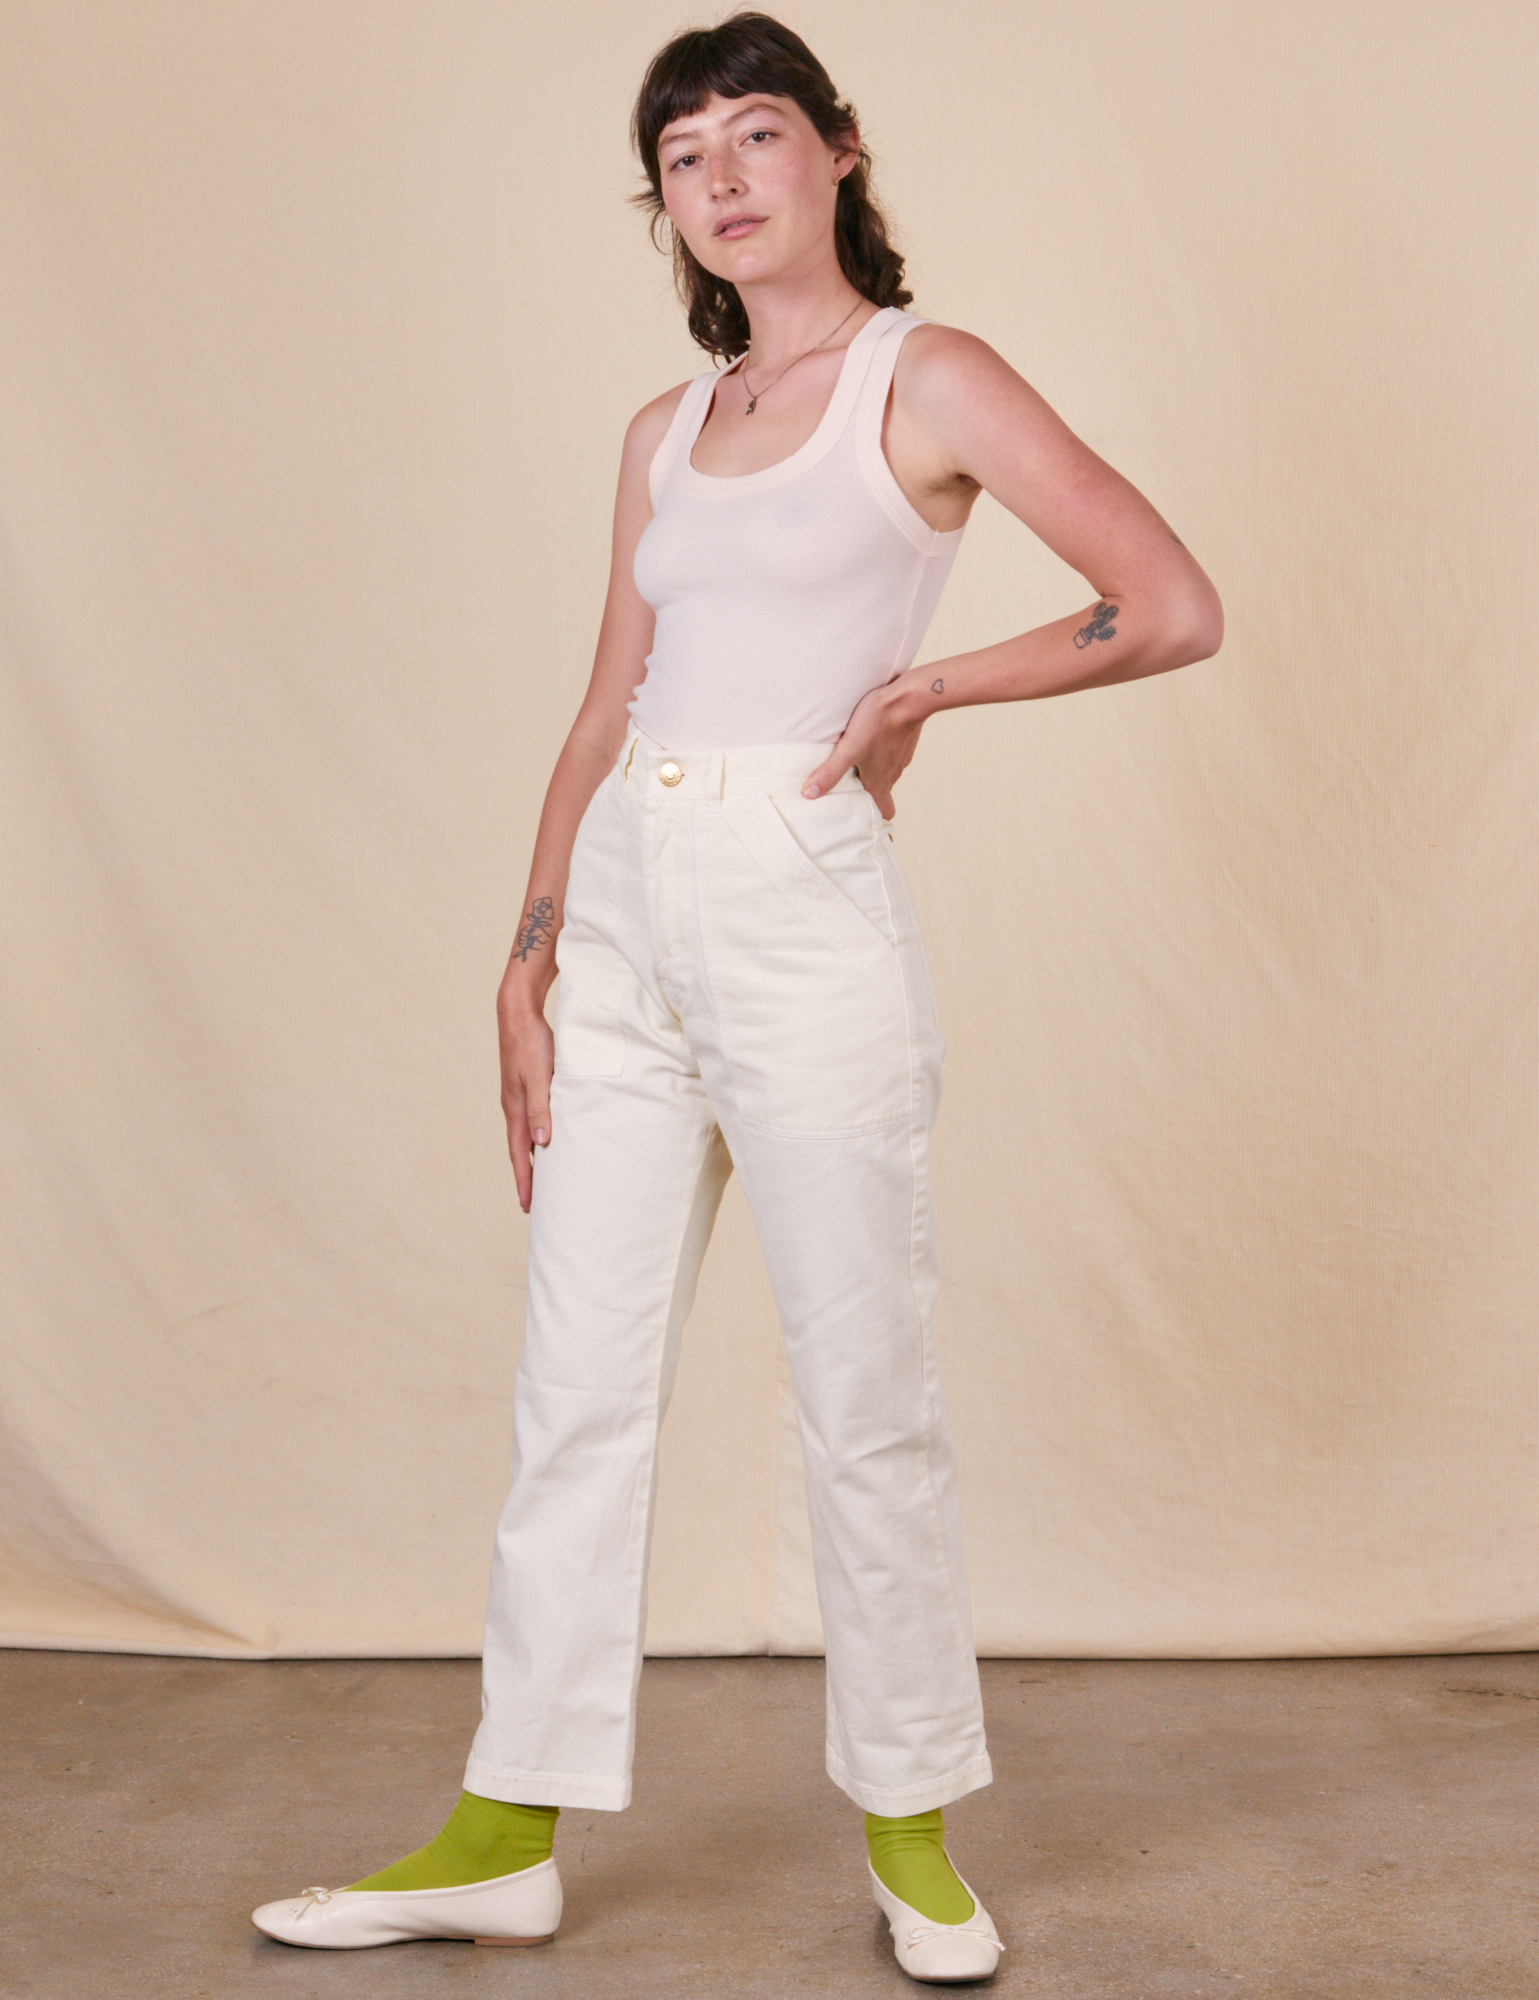 Alex is 5'8" and wearing XS Work Pants in Vintage Tee Off-White paired with a Tank Top